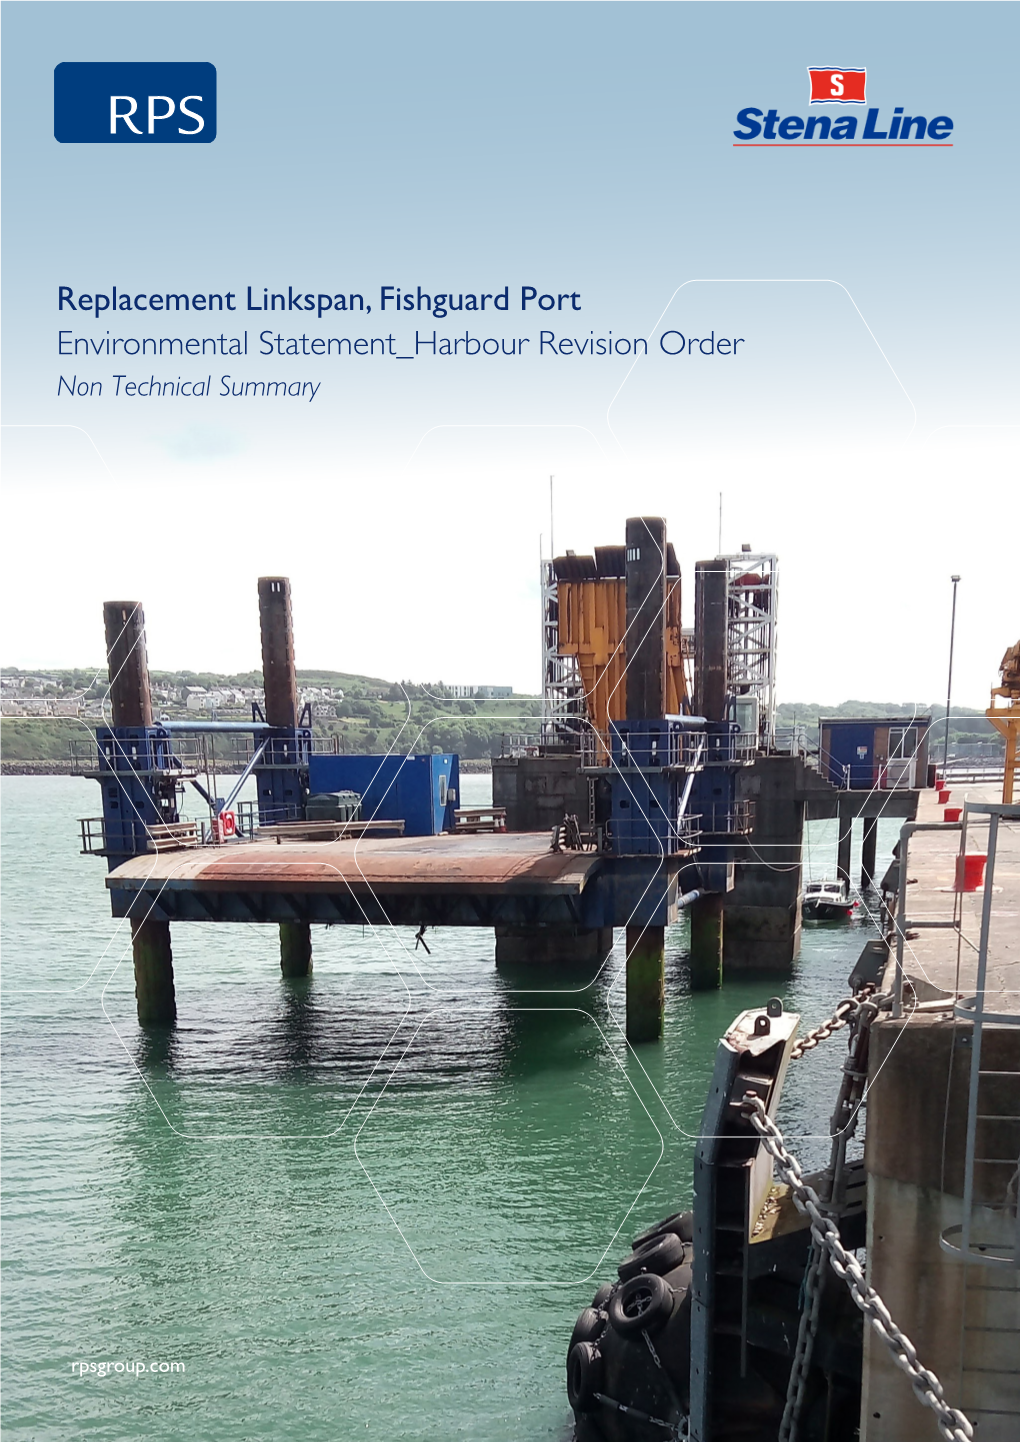 Replacement Linkspan, Fishguard Port Environmental Statement Harbour Revision Order Non Technical Summary